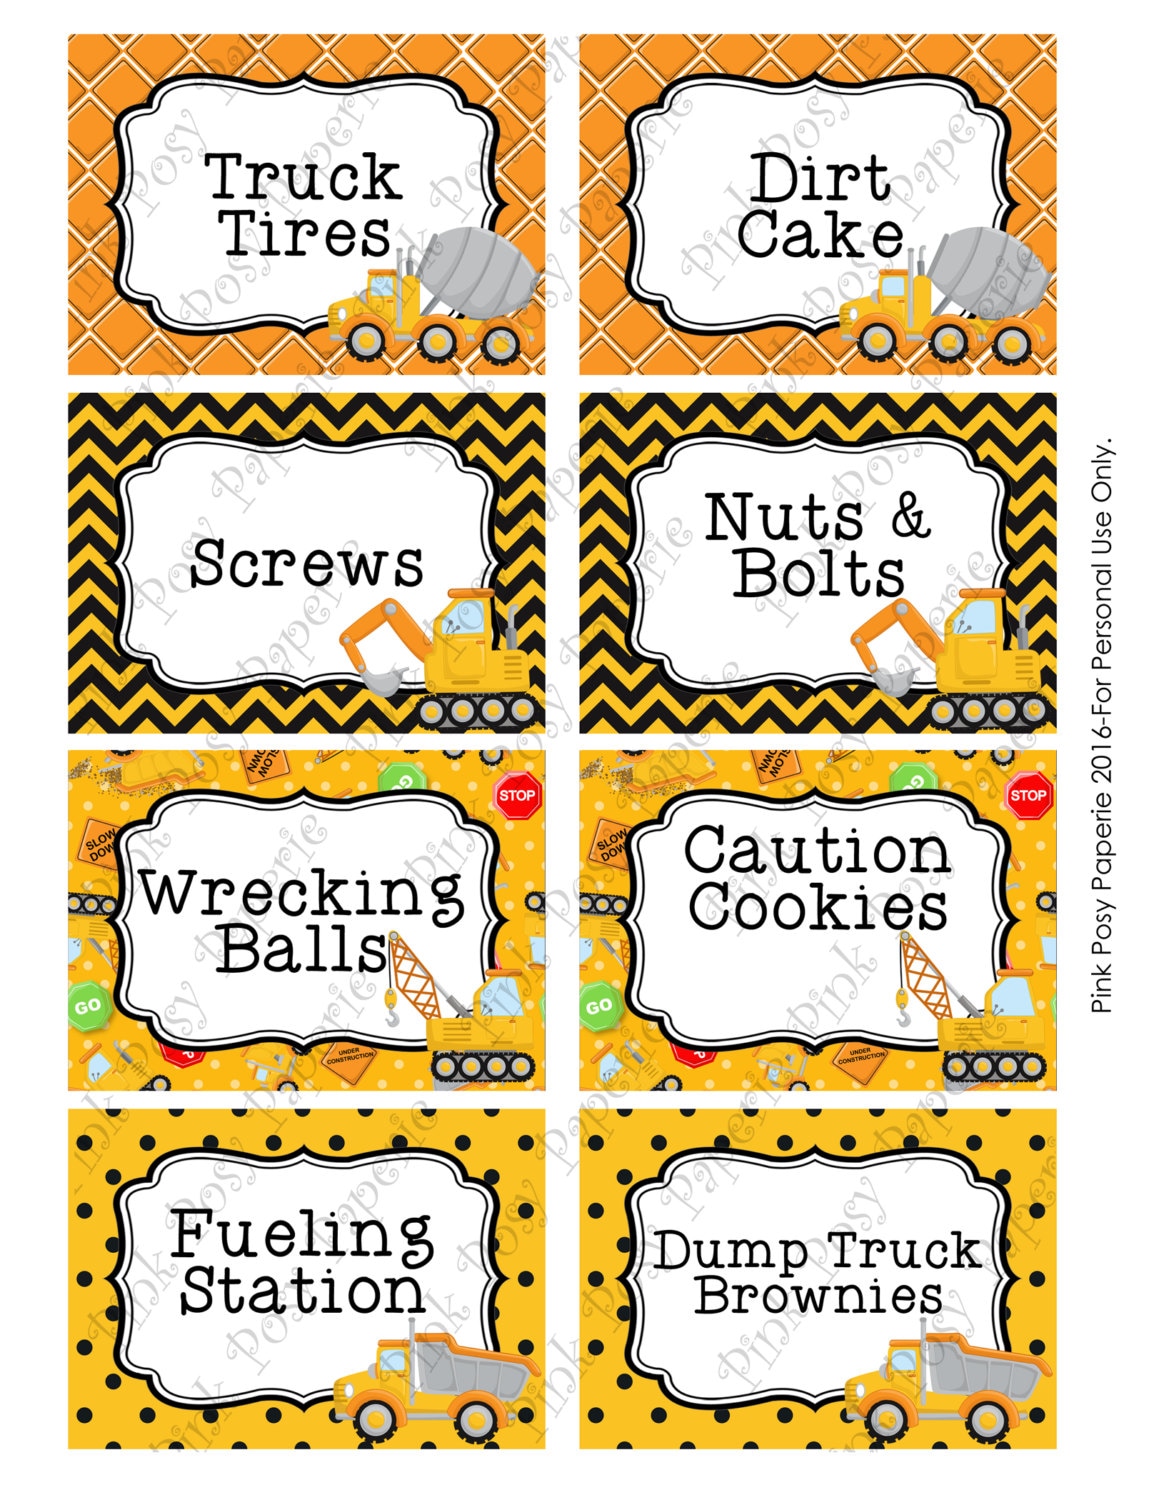 construction-party-food-labels-printable-studio-construction-themed